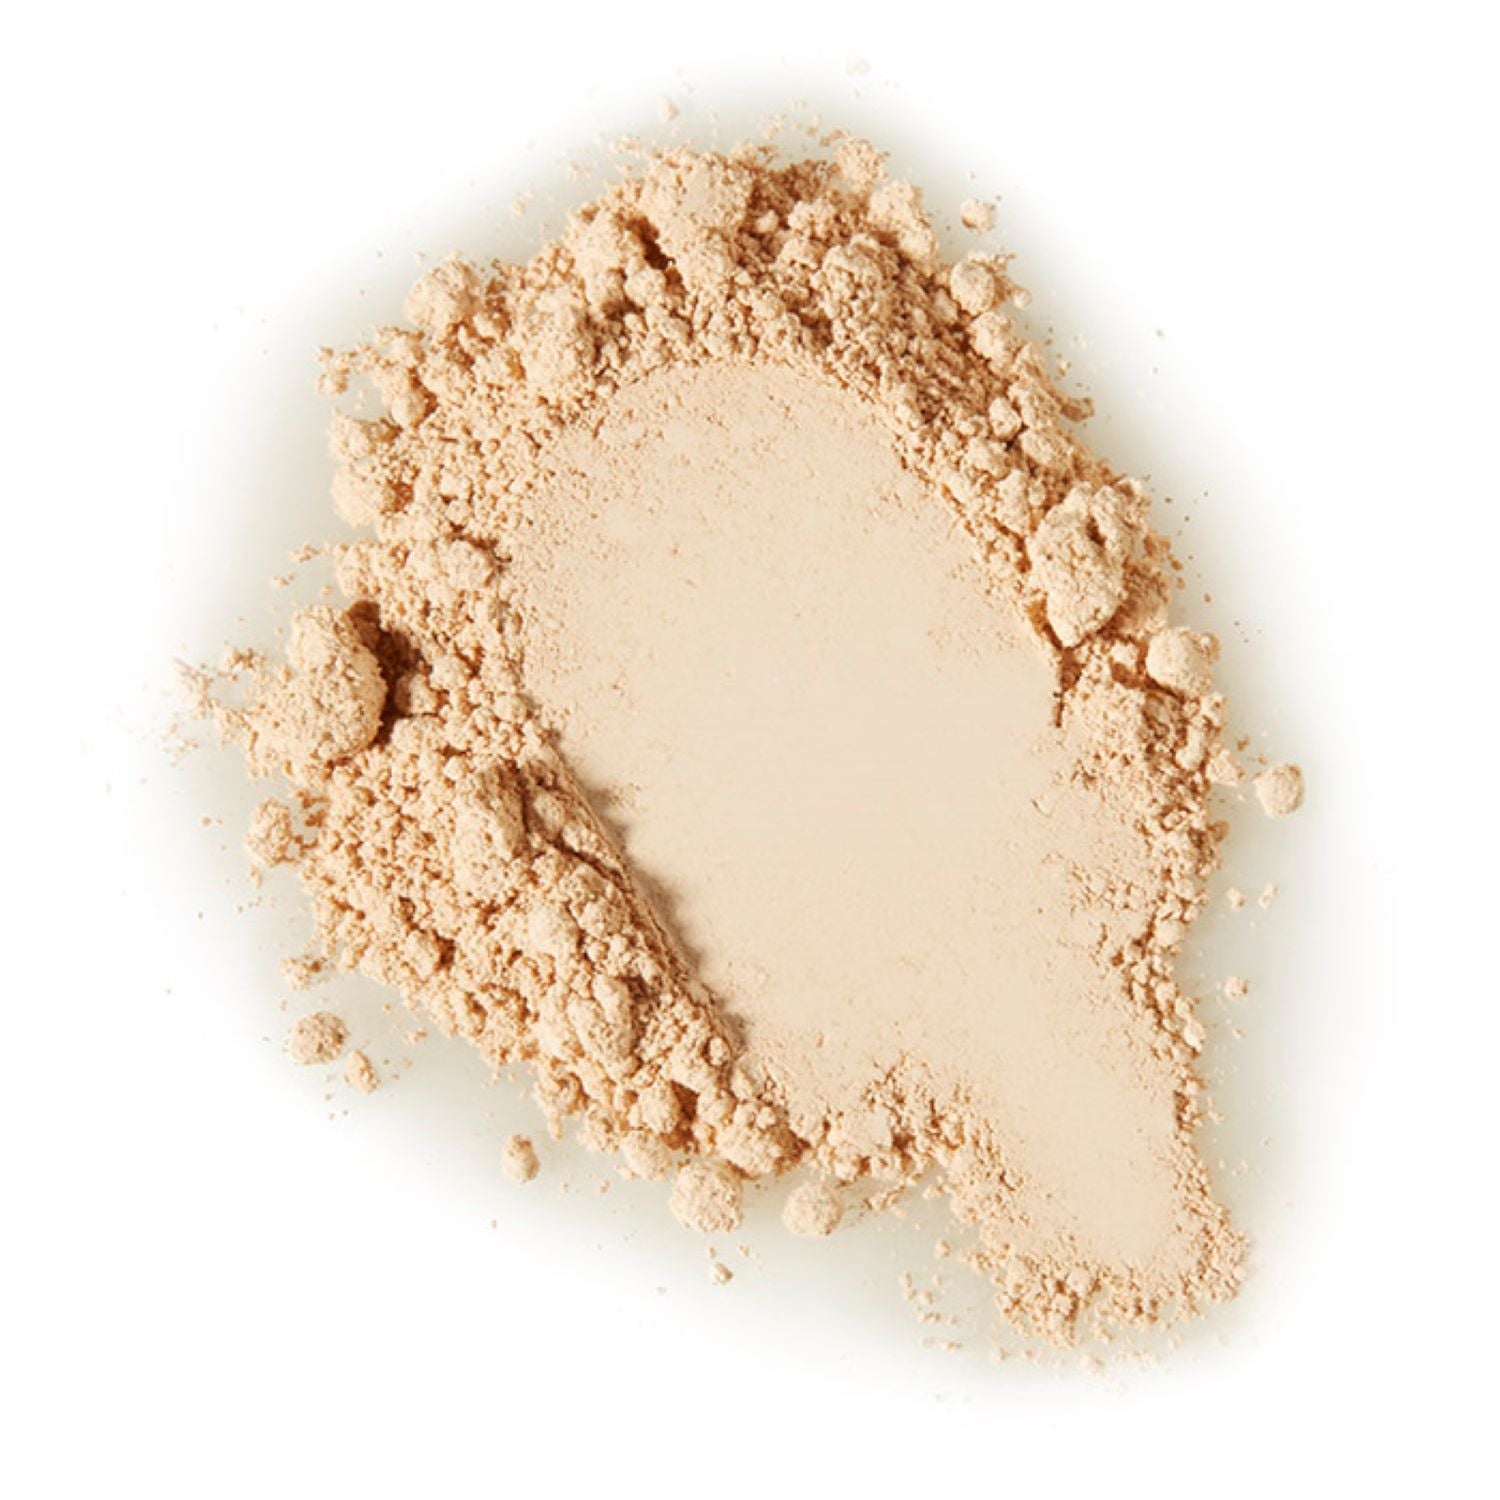 Youngblood Natural Loose Mineral Foundation / IVORY